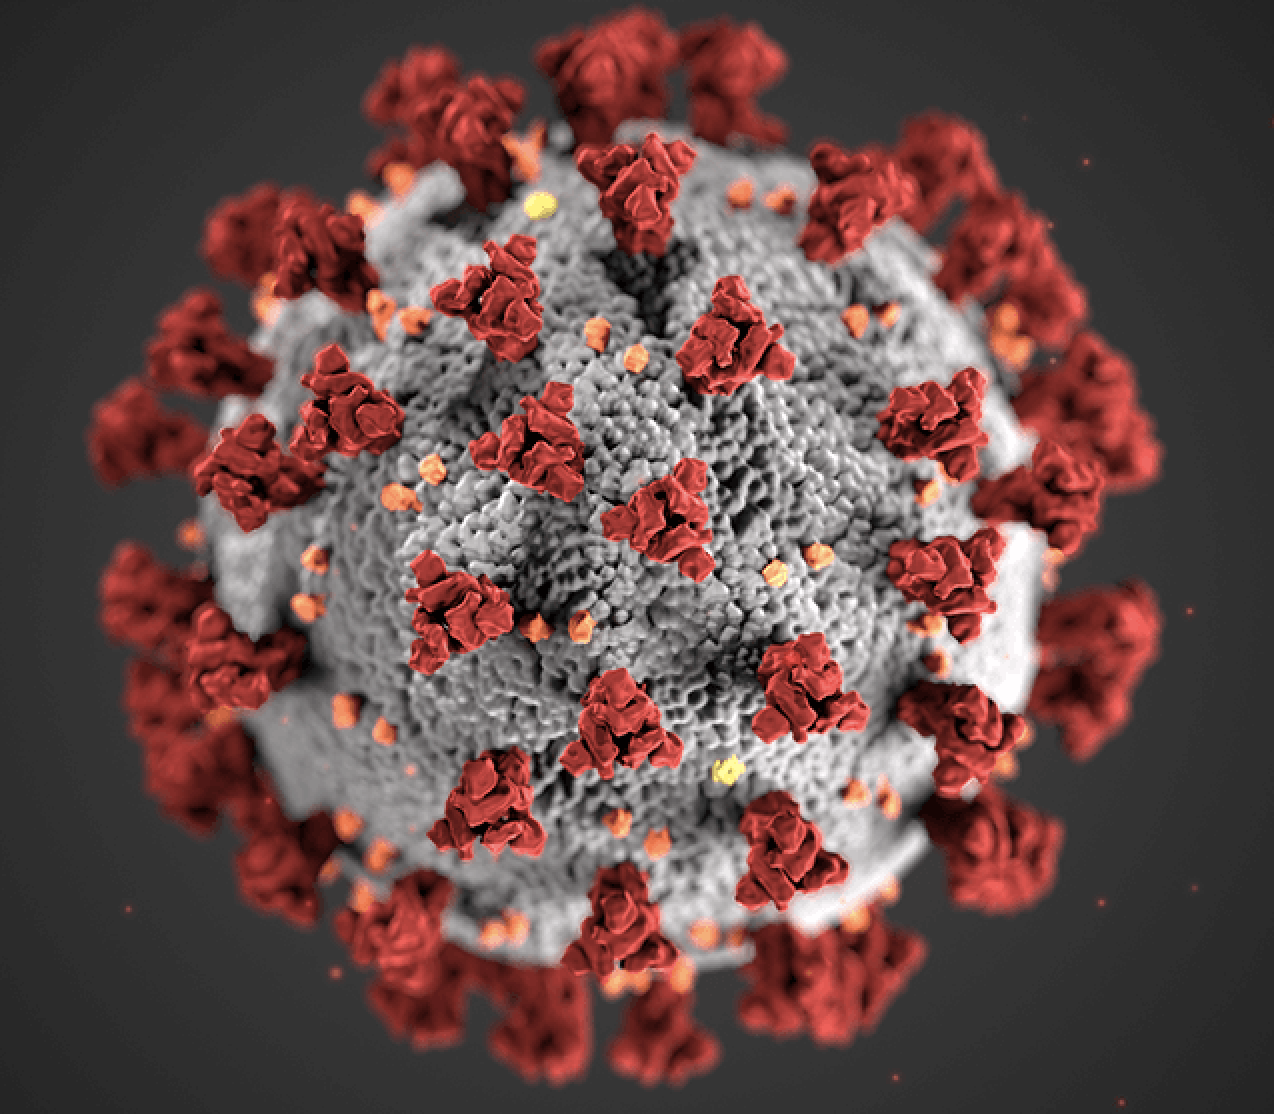 Illustration by the Centers for Disease Control and Prevention (CDC) of the Severe Acute Respiratory Syndrome coronavirus 2 (SARS-CoV-2), which has been named coronavirus disease 2019 (COVID-19).